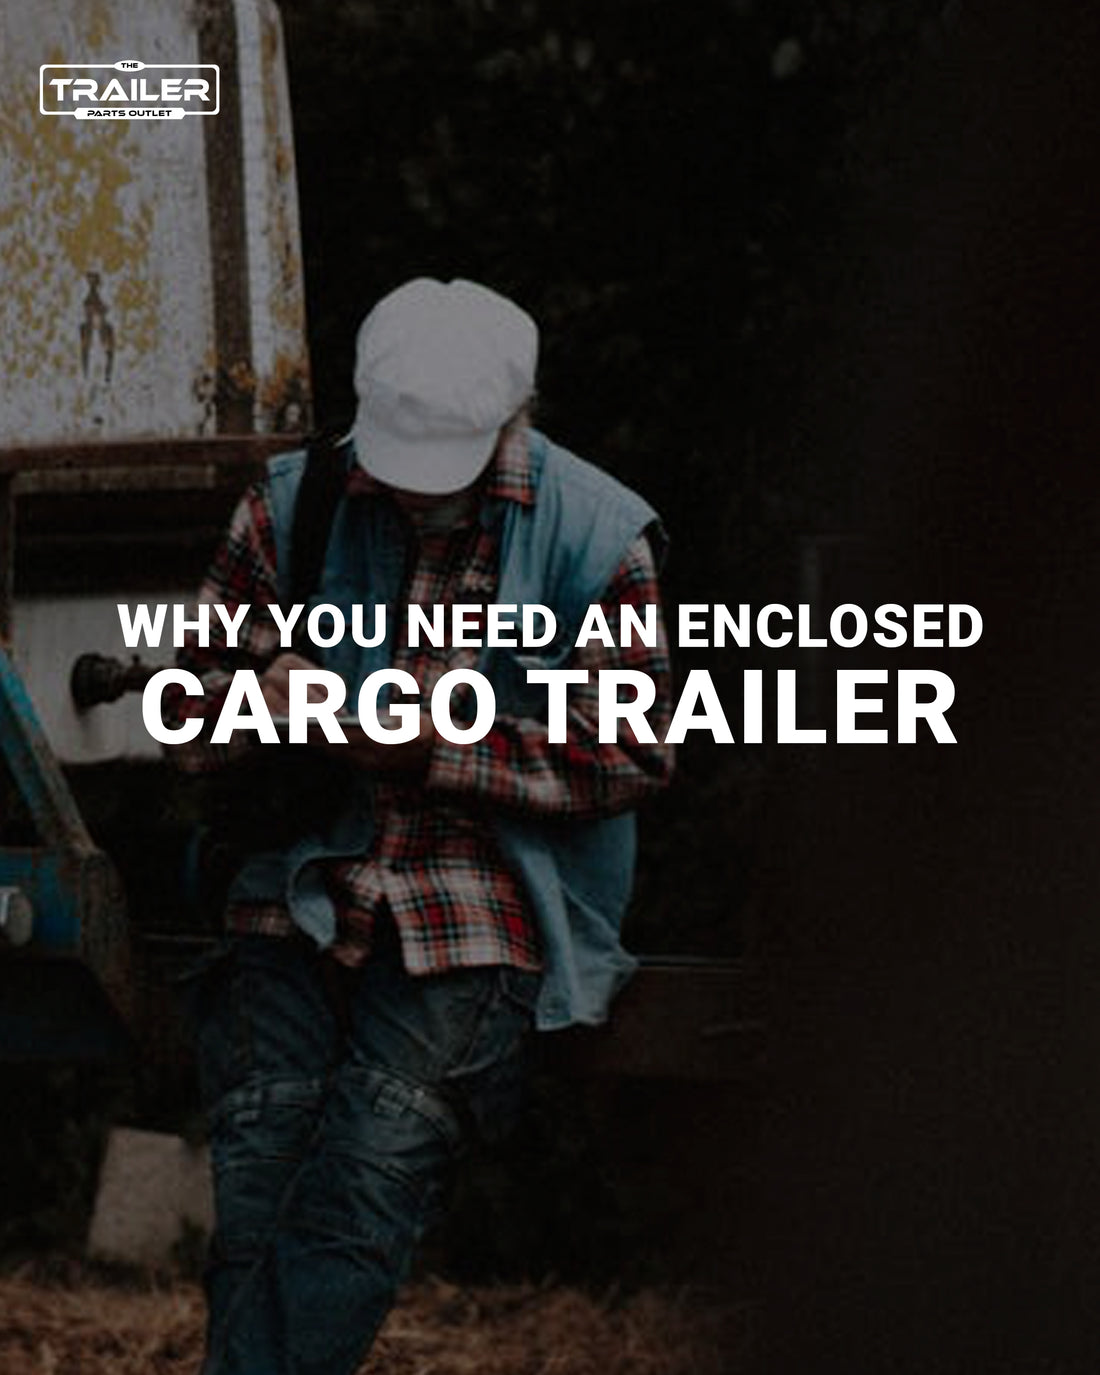 Why You Need an Enclosed Cargo Trailer